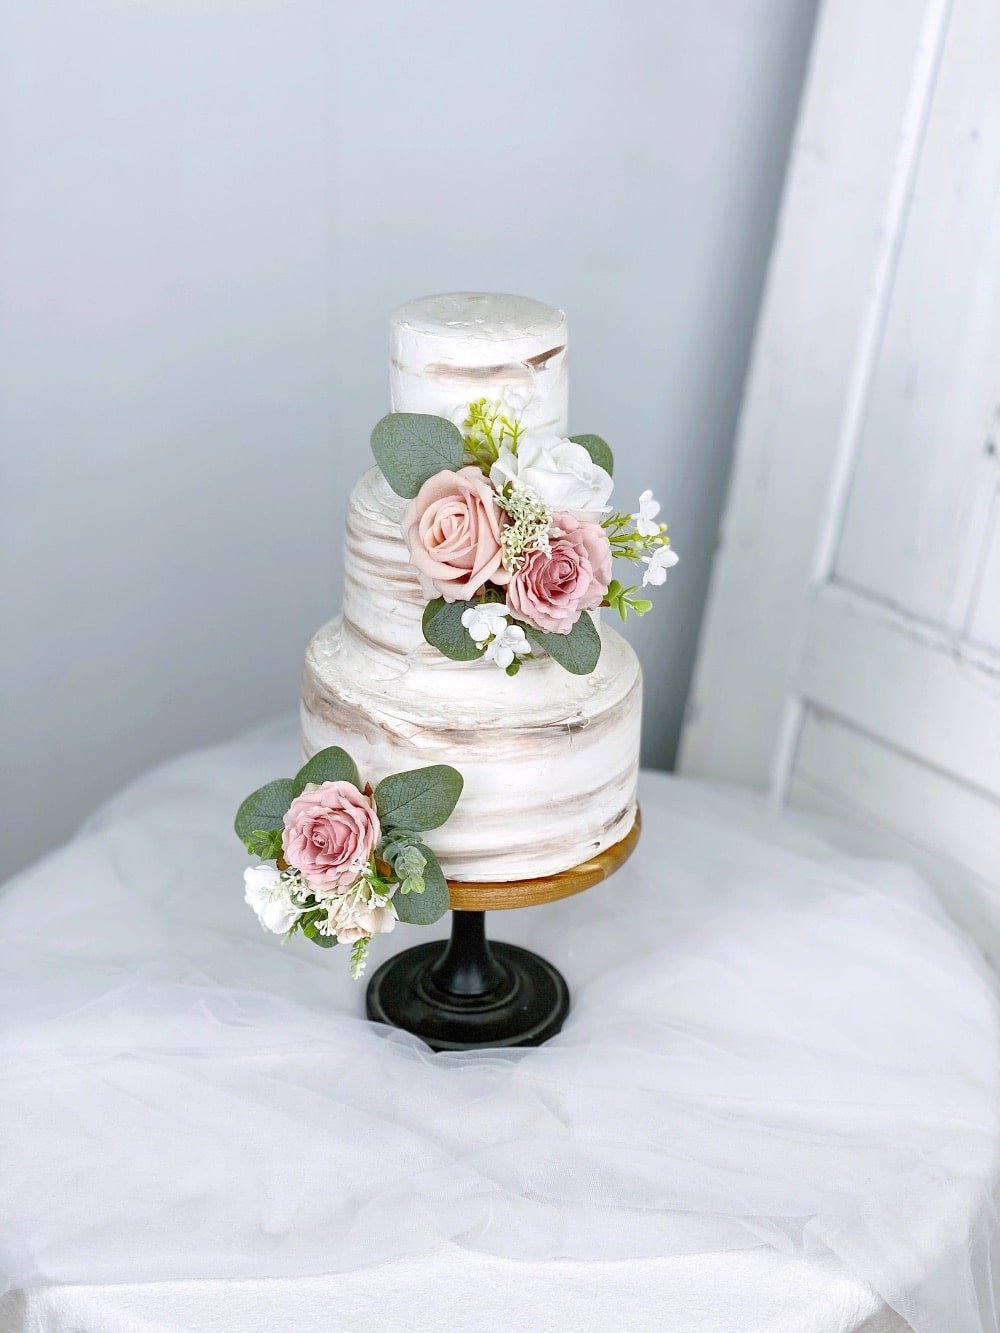 Rose and Pink Cake Topper by MerciGarden